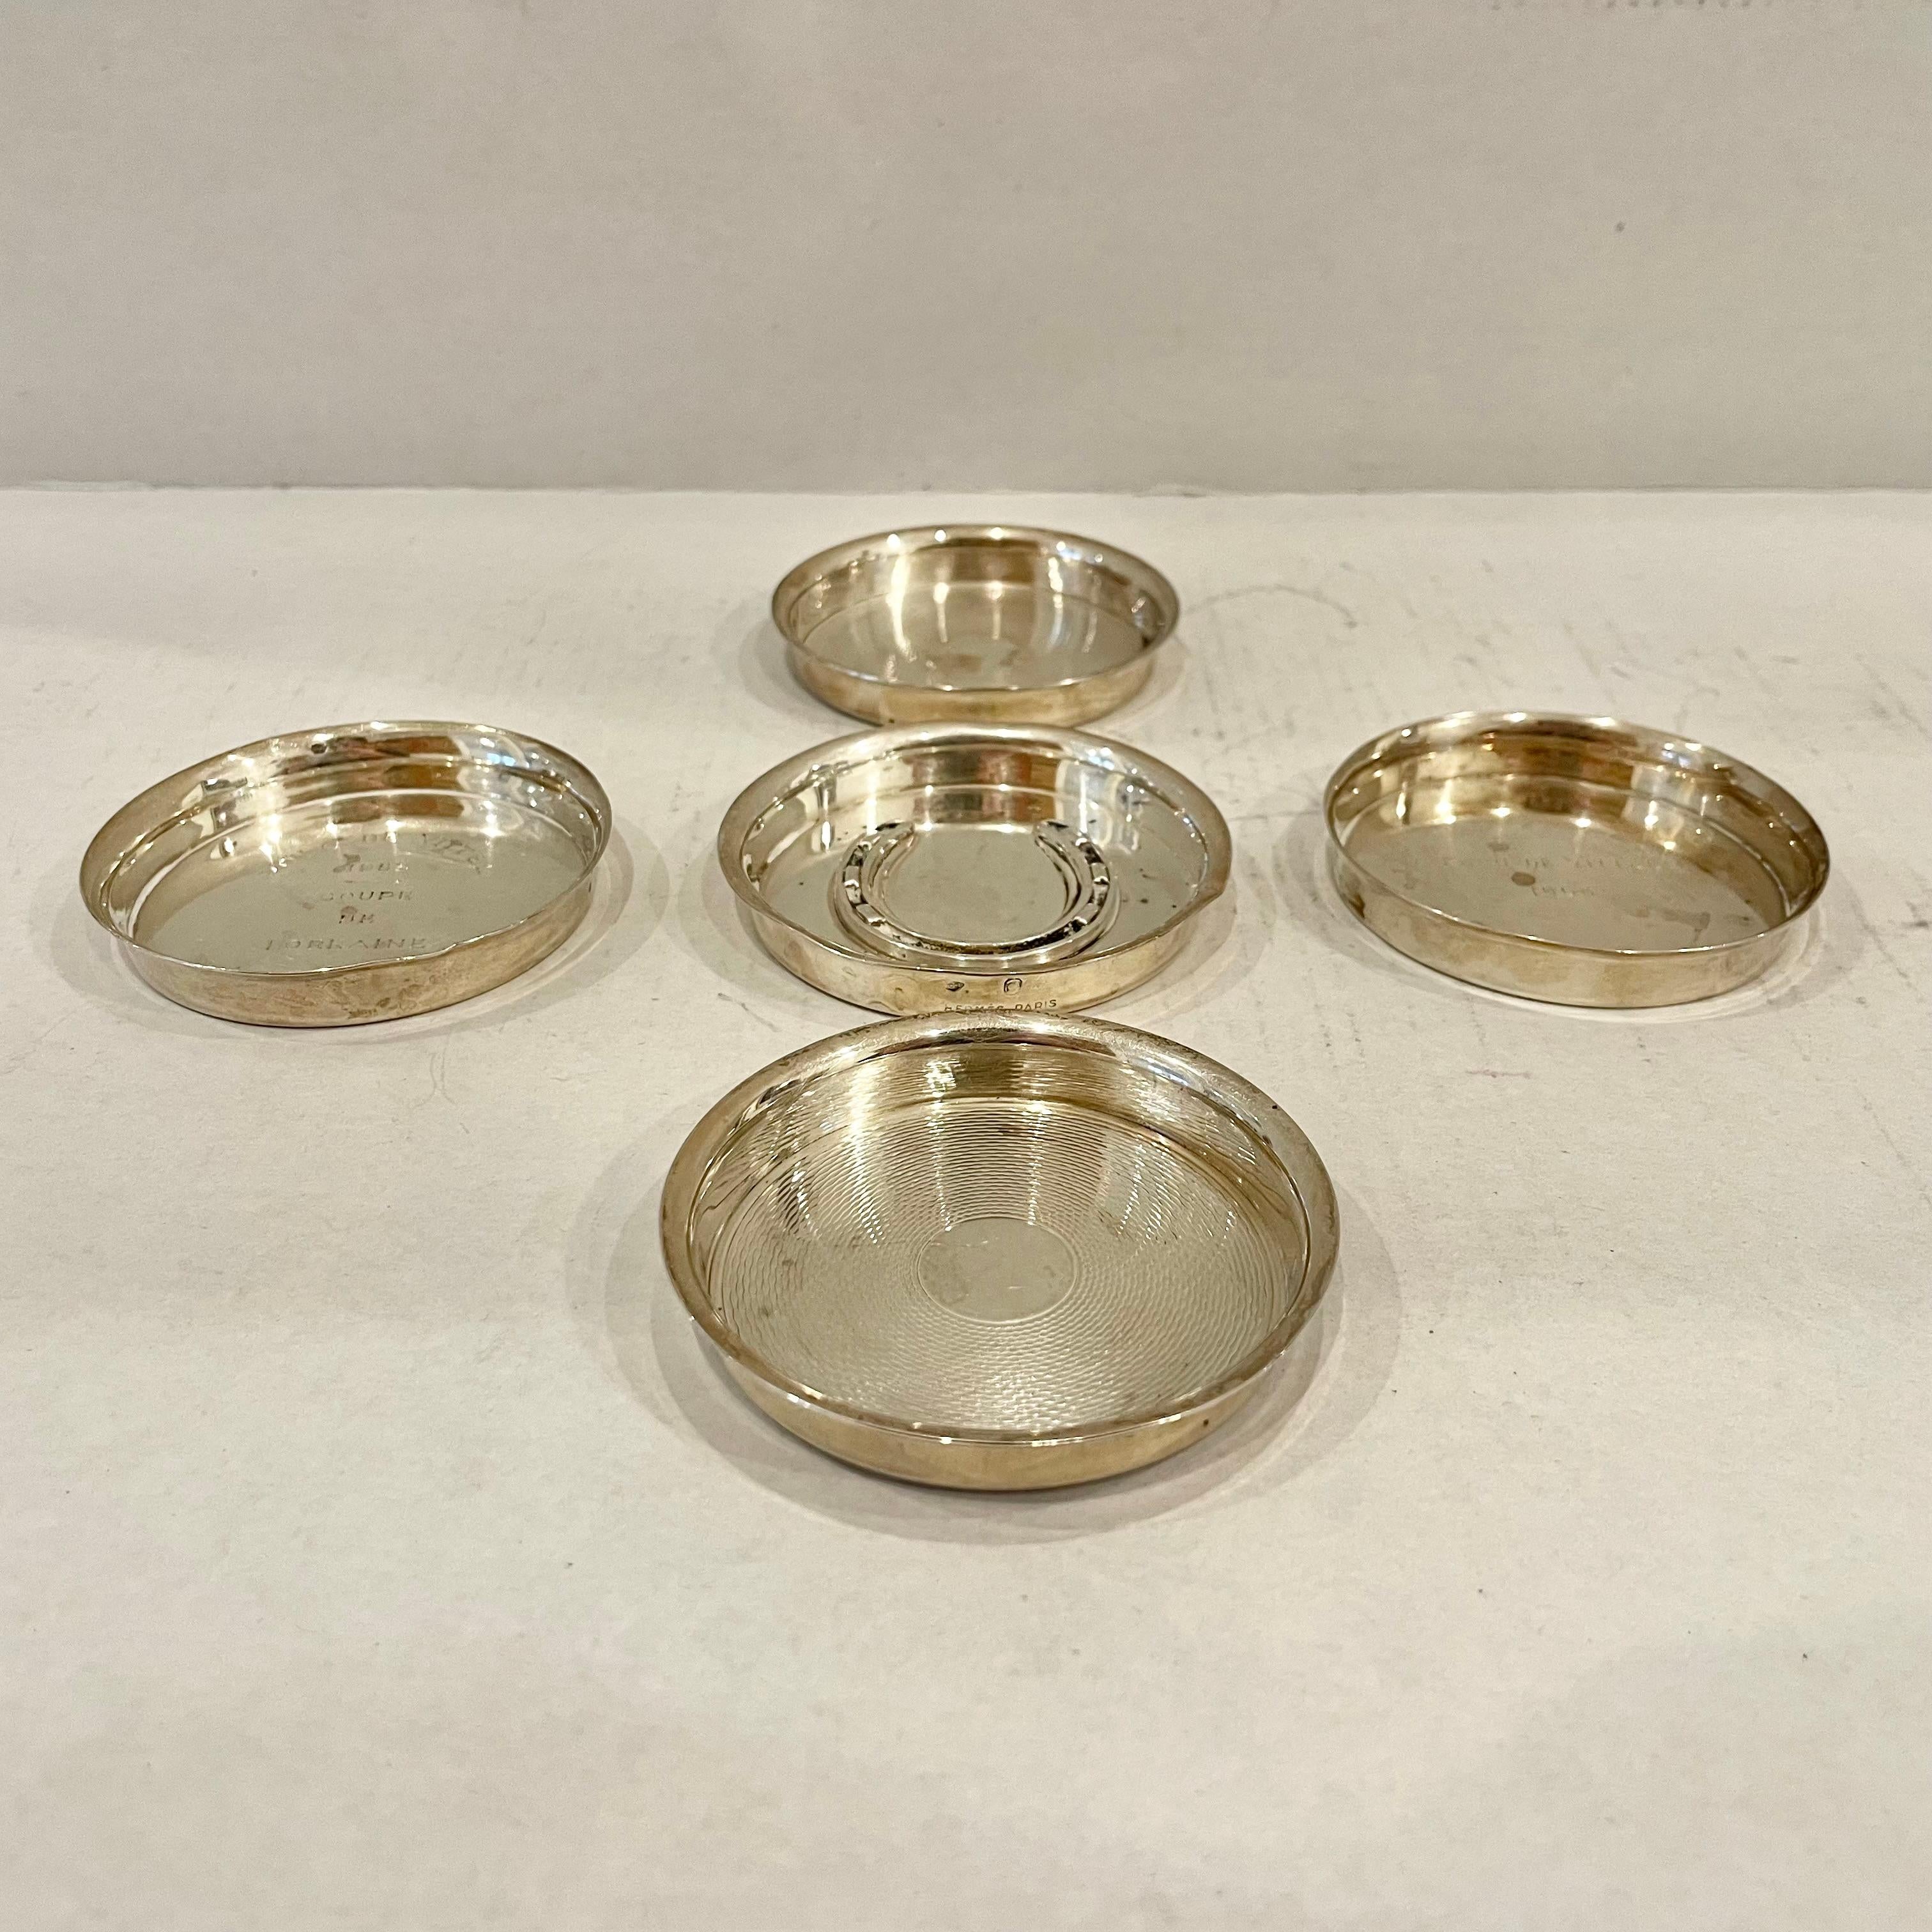 Beautiful set of Hermès jewelry dishes. Hermès stamped on the side or base of each piece. Silver plated hallmarks throughout. Different designs on almost every dish. 2 of the five dishes have a scale design, one has an equestrian design while the